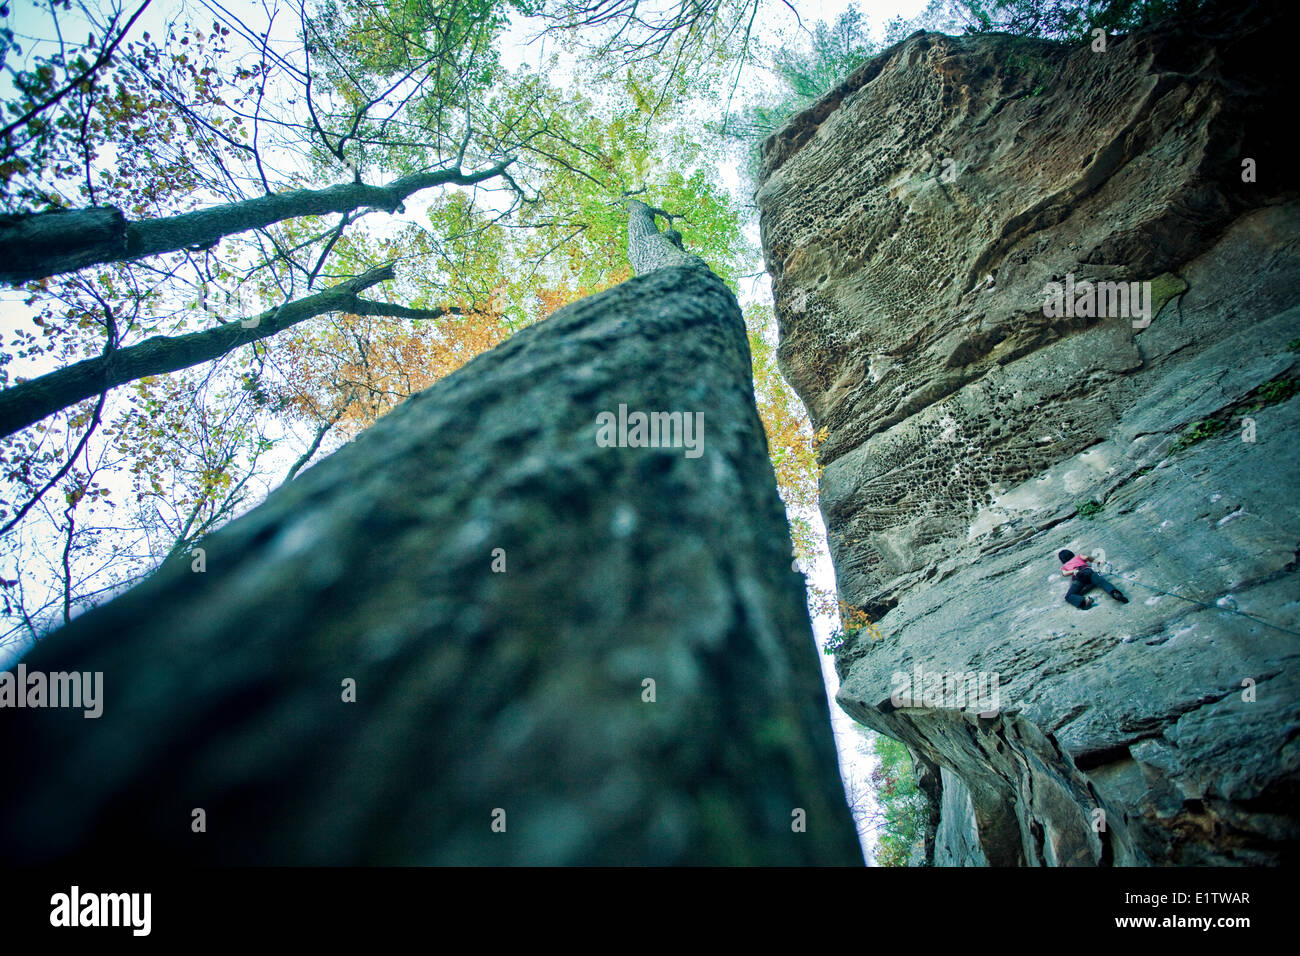 A strong female climber ascends Twinkie 12a, Red River Gorge, Kentucky Stock Photo